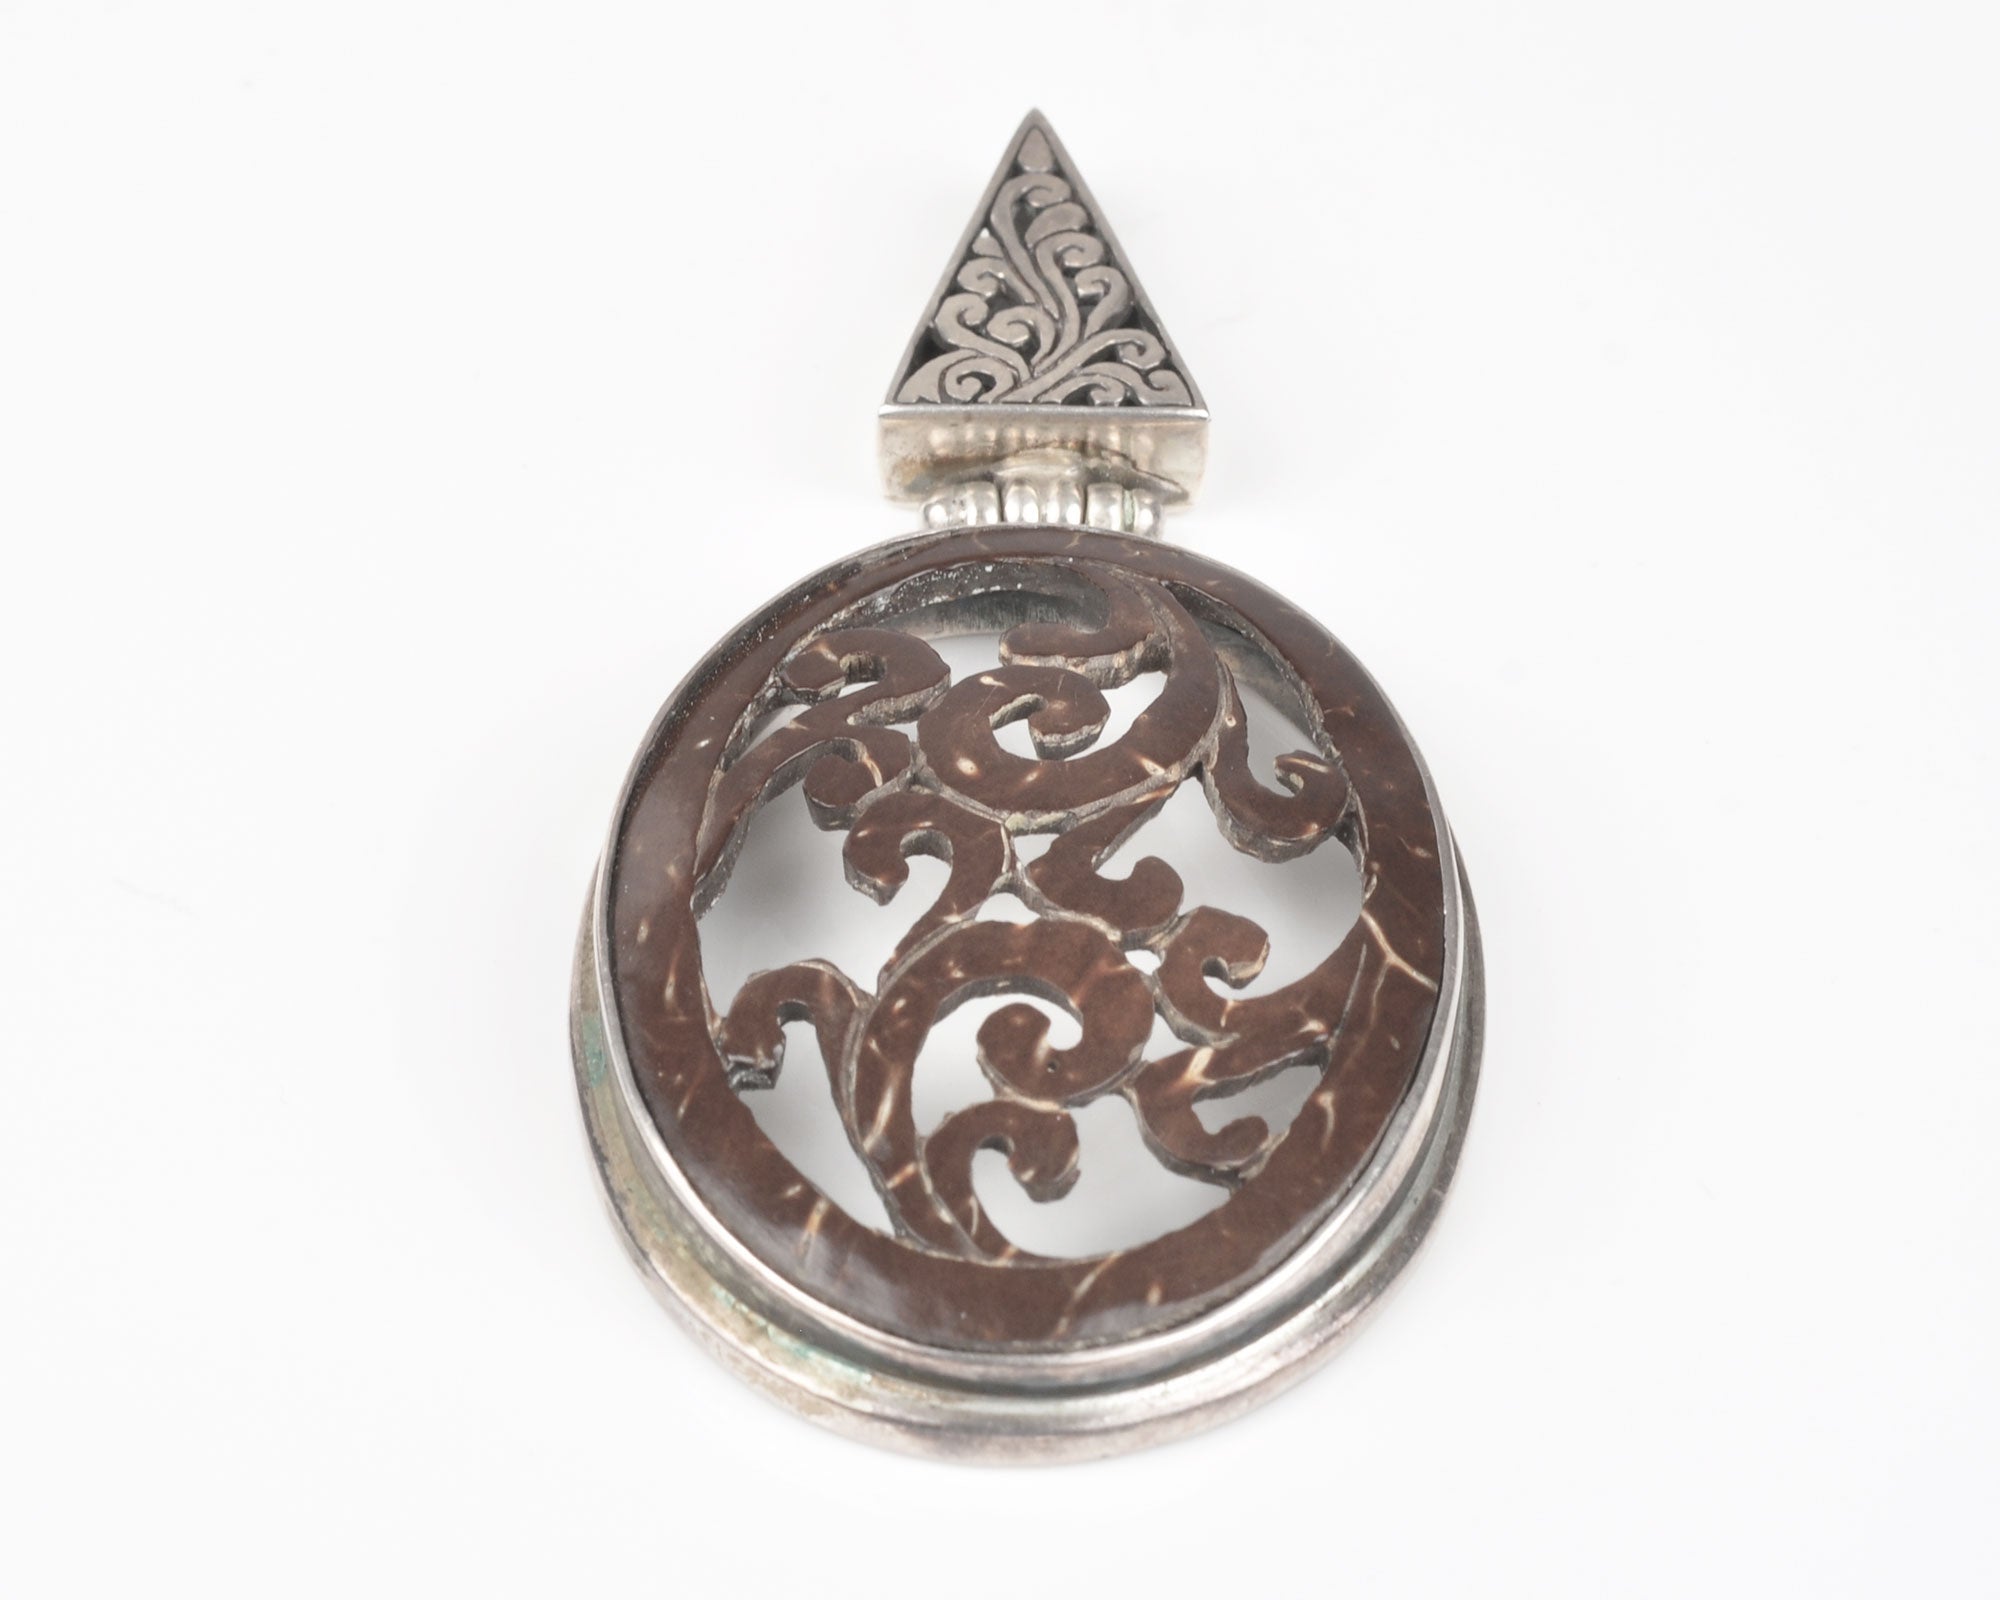 Vintage Jewelry-Bali Hand Carved Coconut-Sterling Silver Pendant